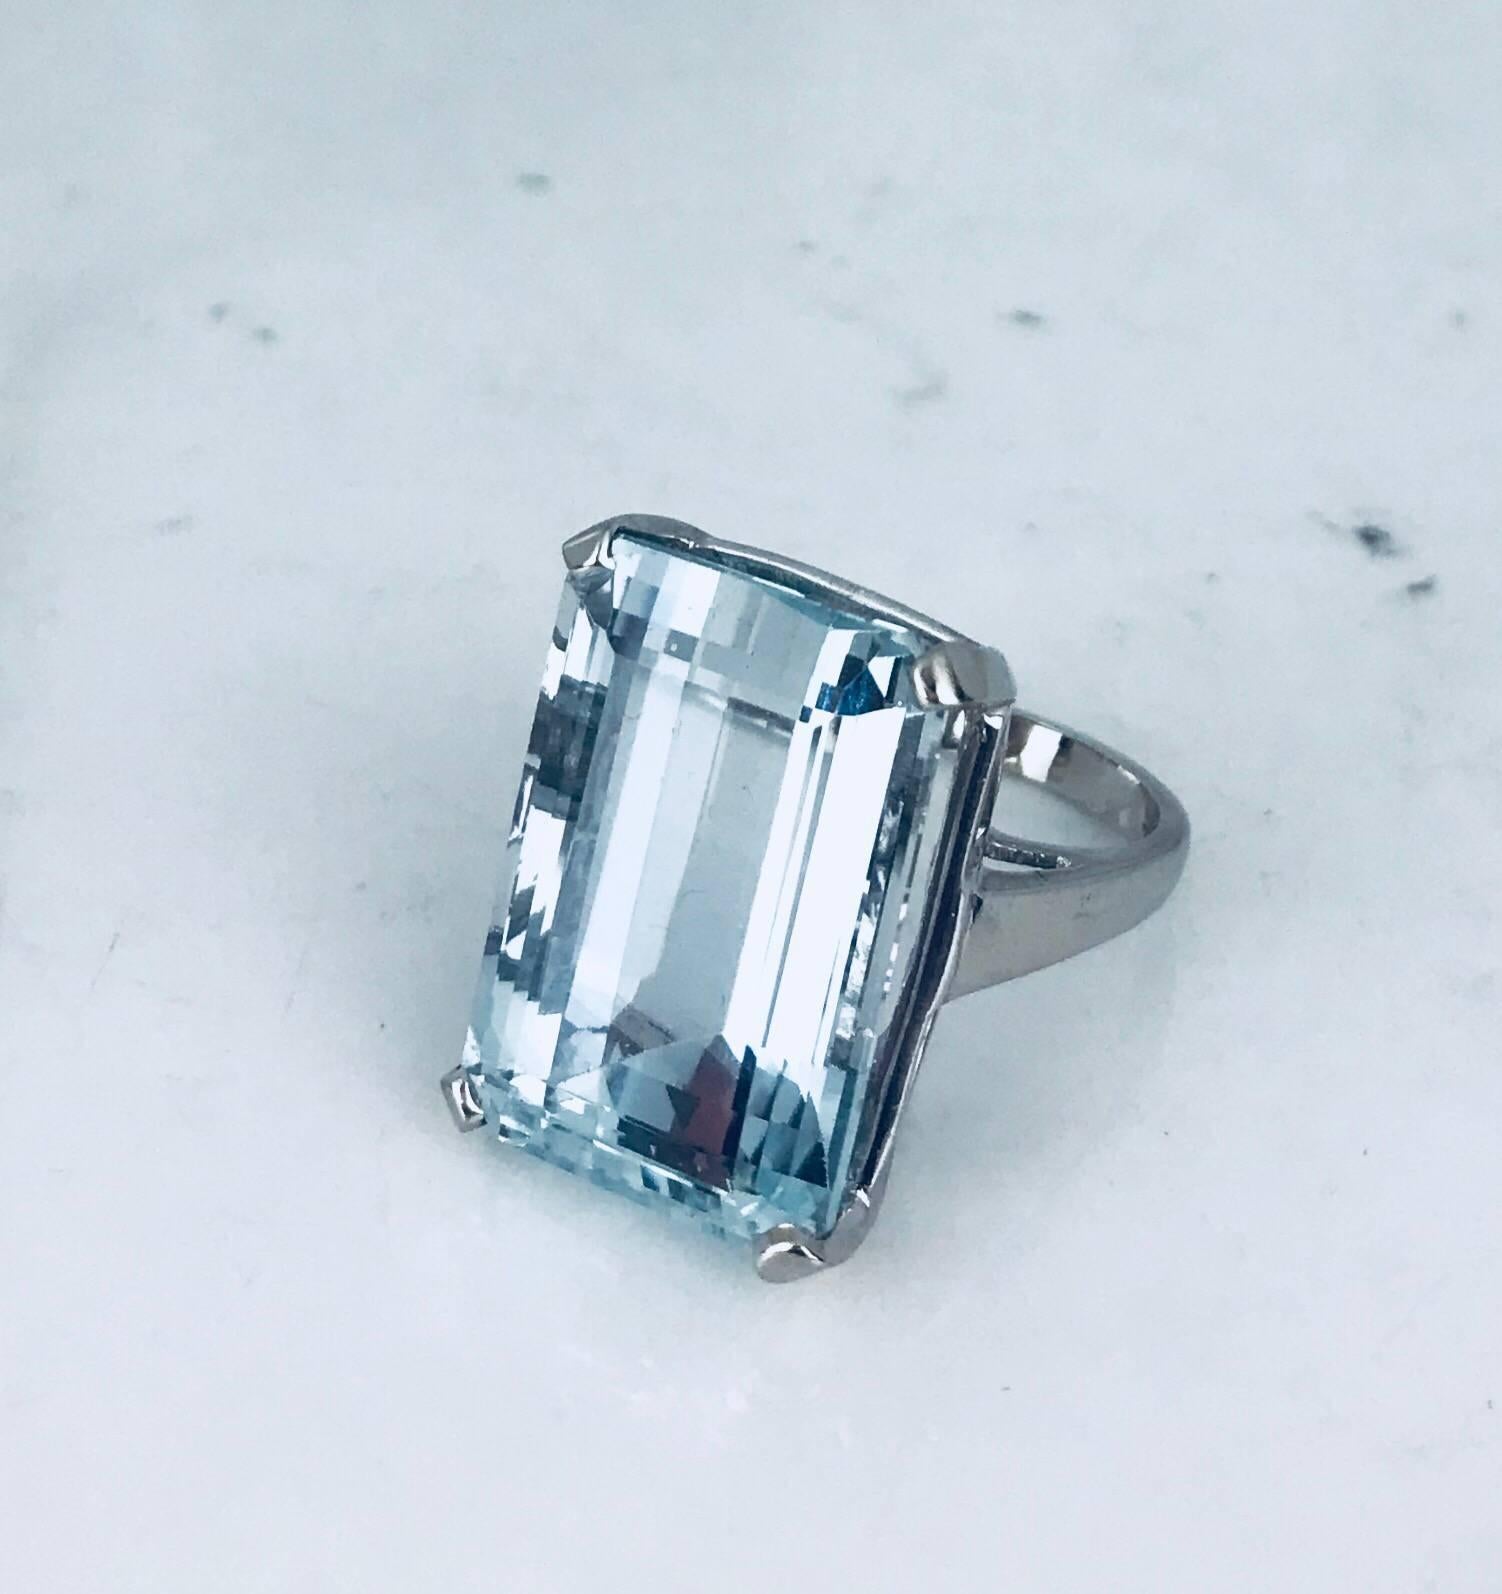 One 18 karat white gold Aquamarine Ring. This Retro style is from the 1950's and is approximately 35 carats in size. The diameter of the gemstone is 22.45 x 15.79 x 12.00 millimeters. The color is of a fine, powder blue hue set in a 4-prong setting.